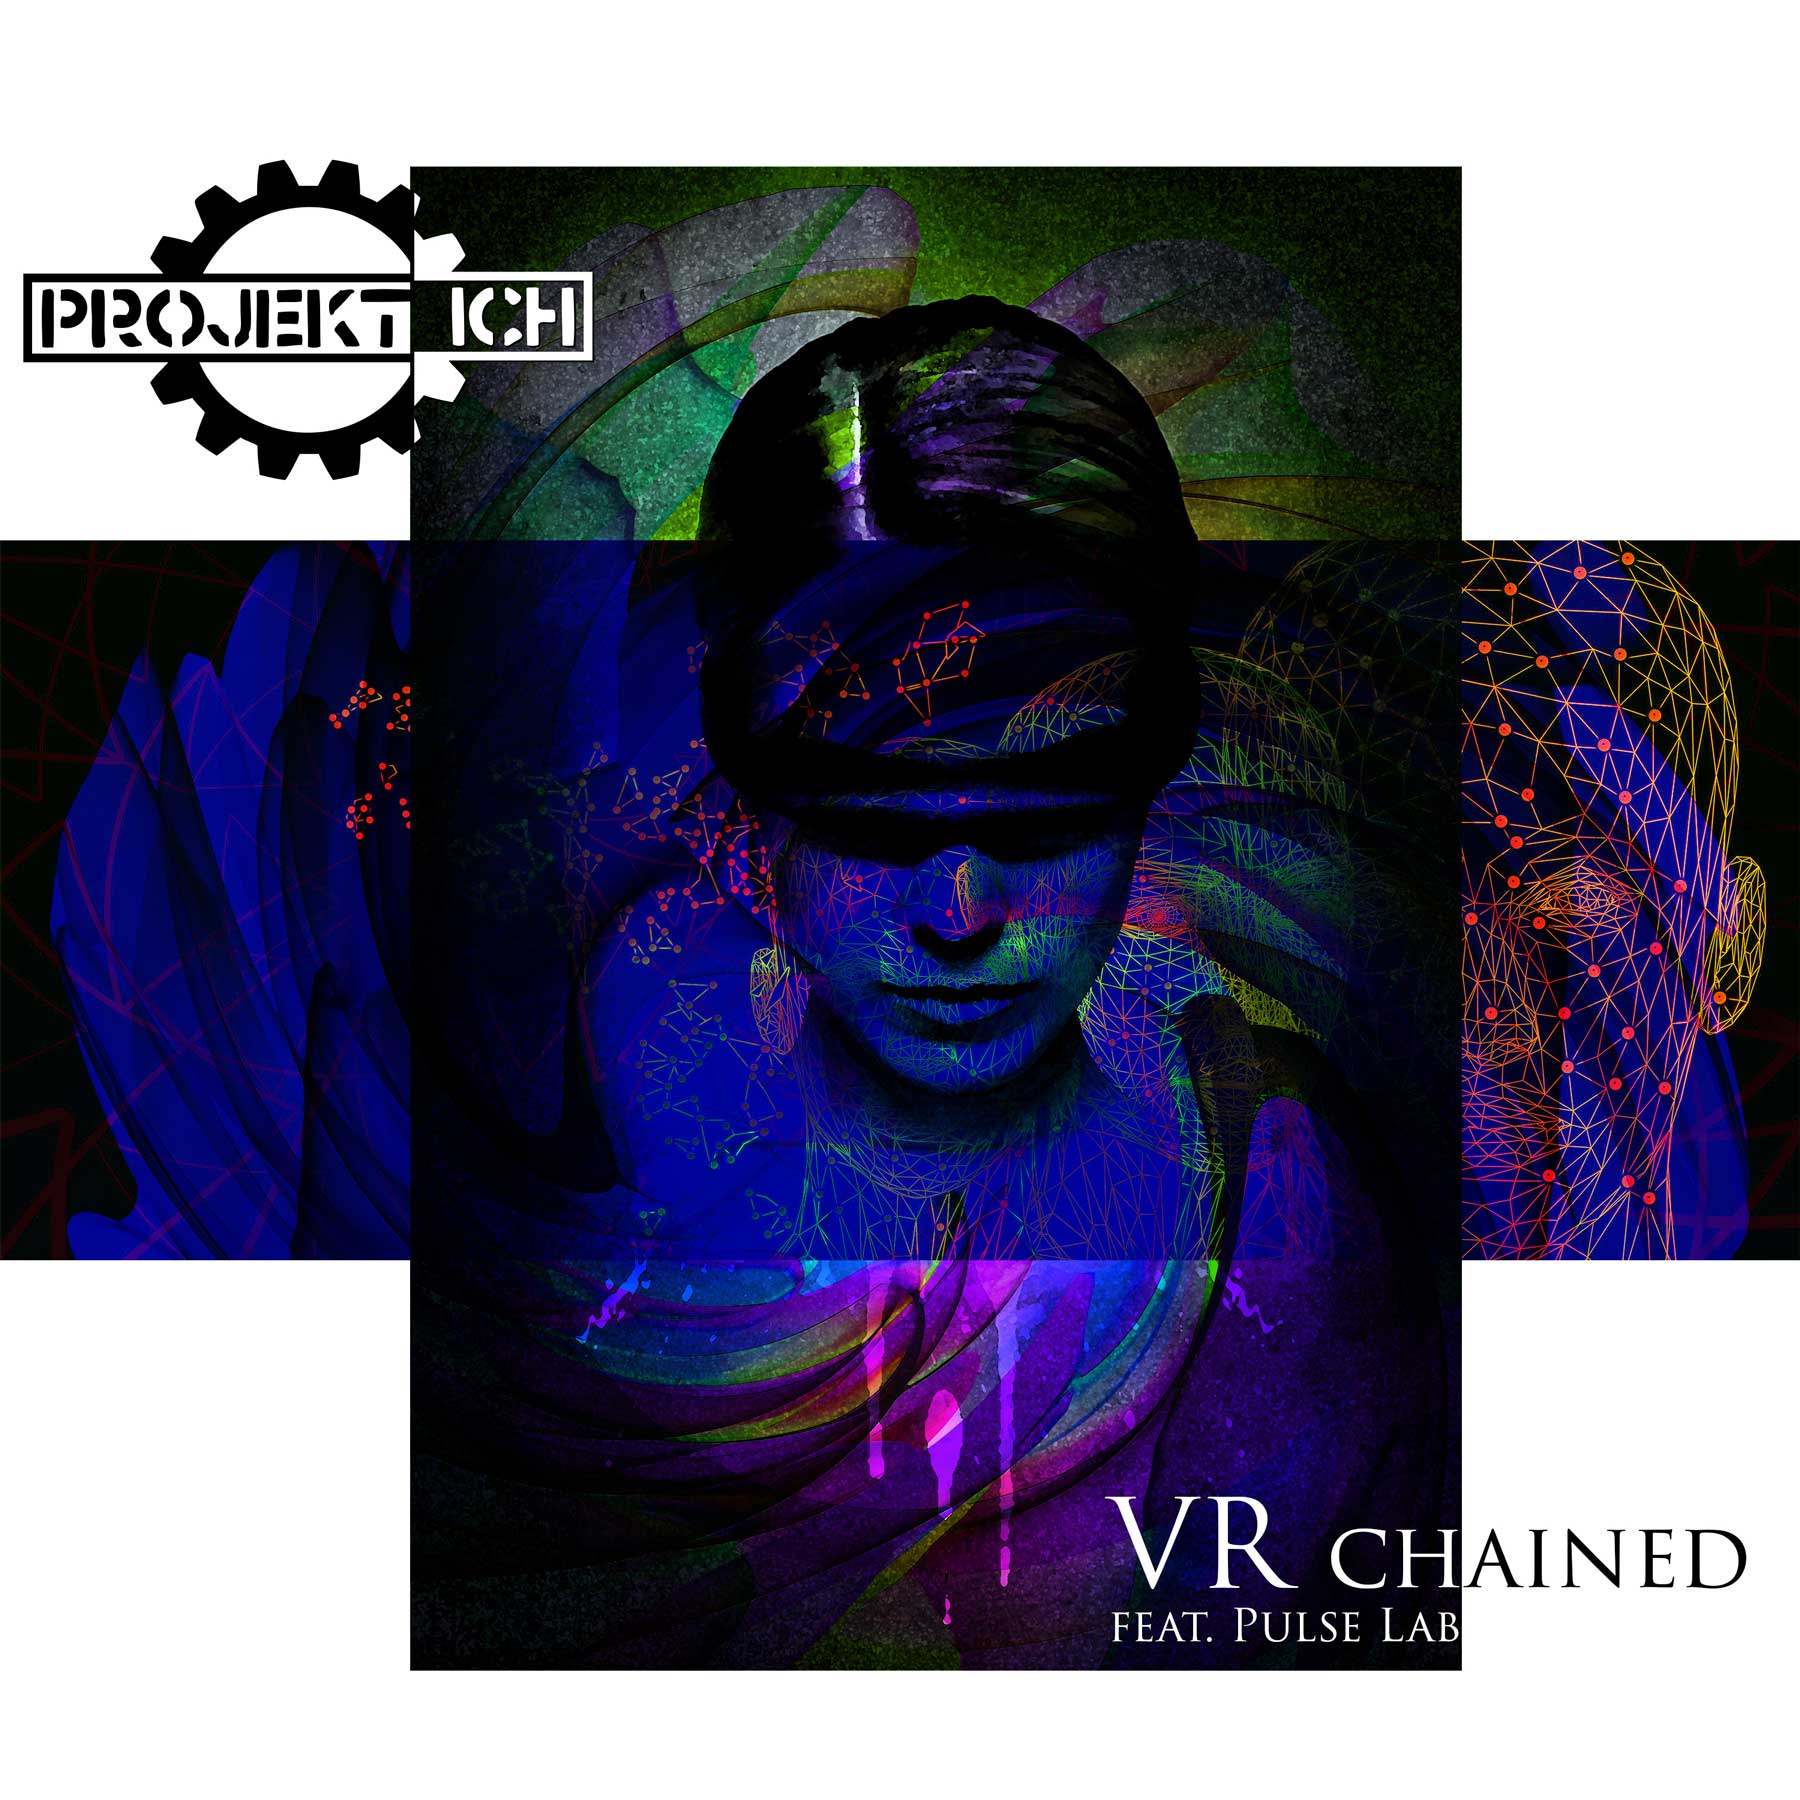 Projekt Ich - VR Chained (feat. Pulse Lab) - Projekt Ich - VR Chained (feat. Pulse Lab)